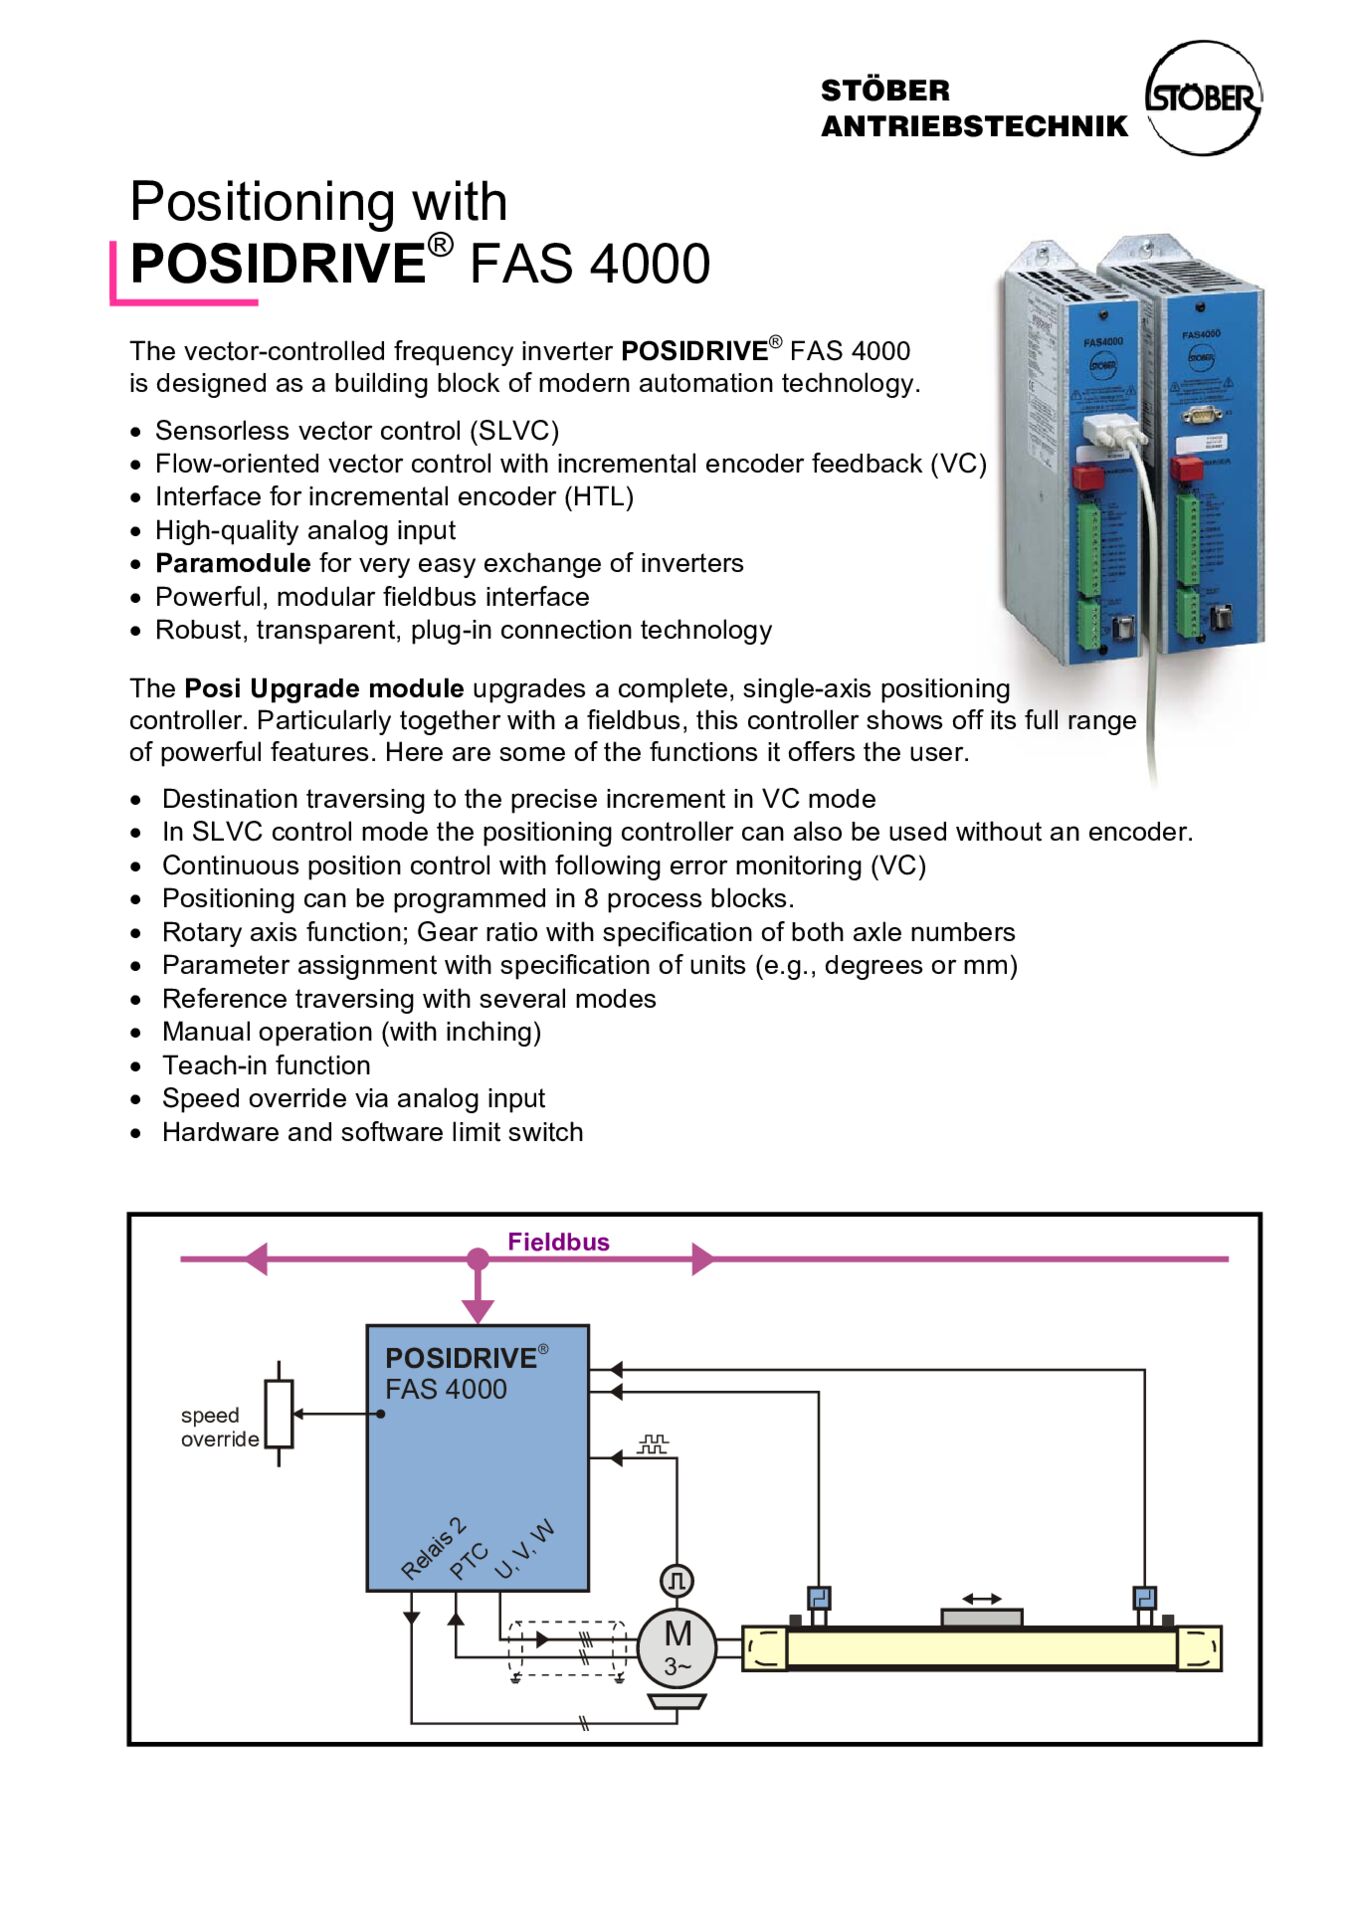 Posi-Upgrade Frequency inverter POSIDRIVE FAS 4000